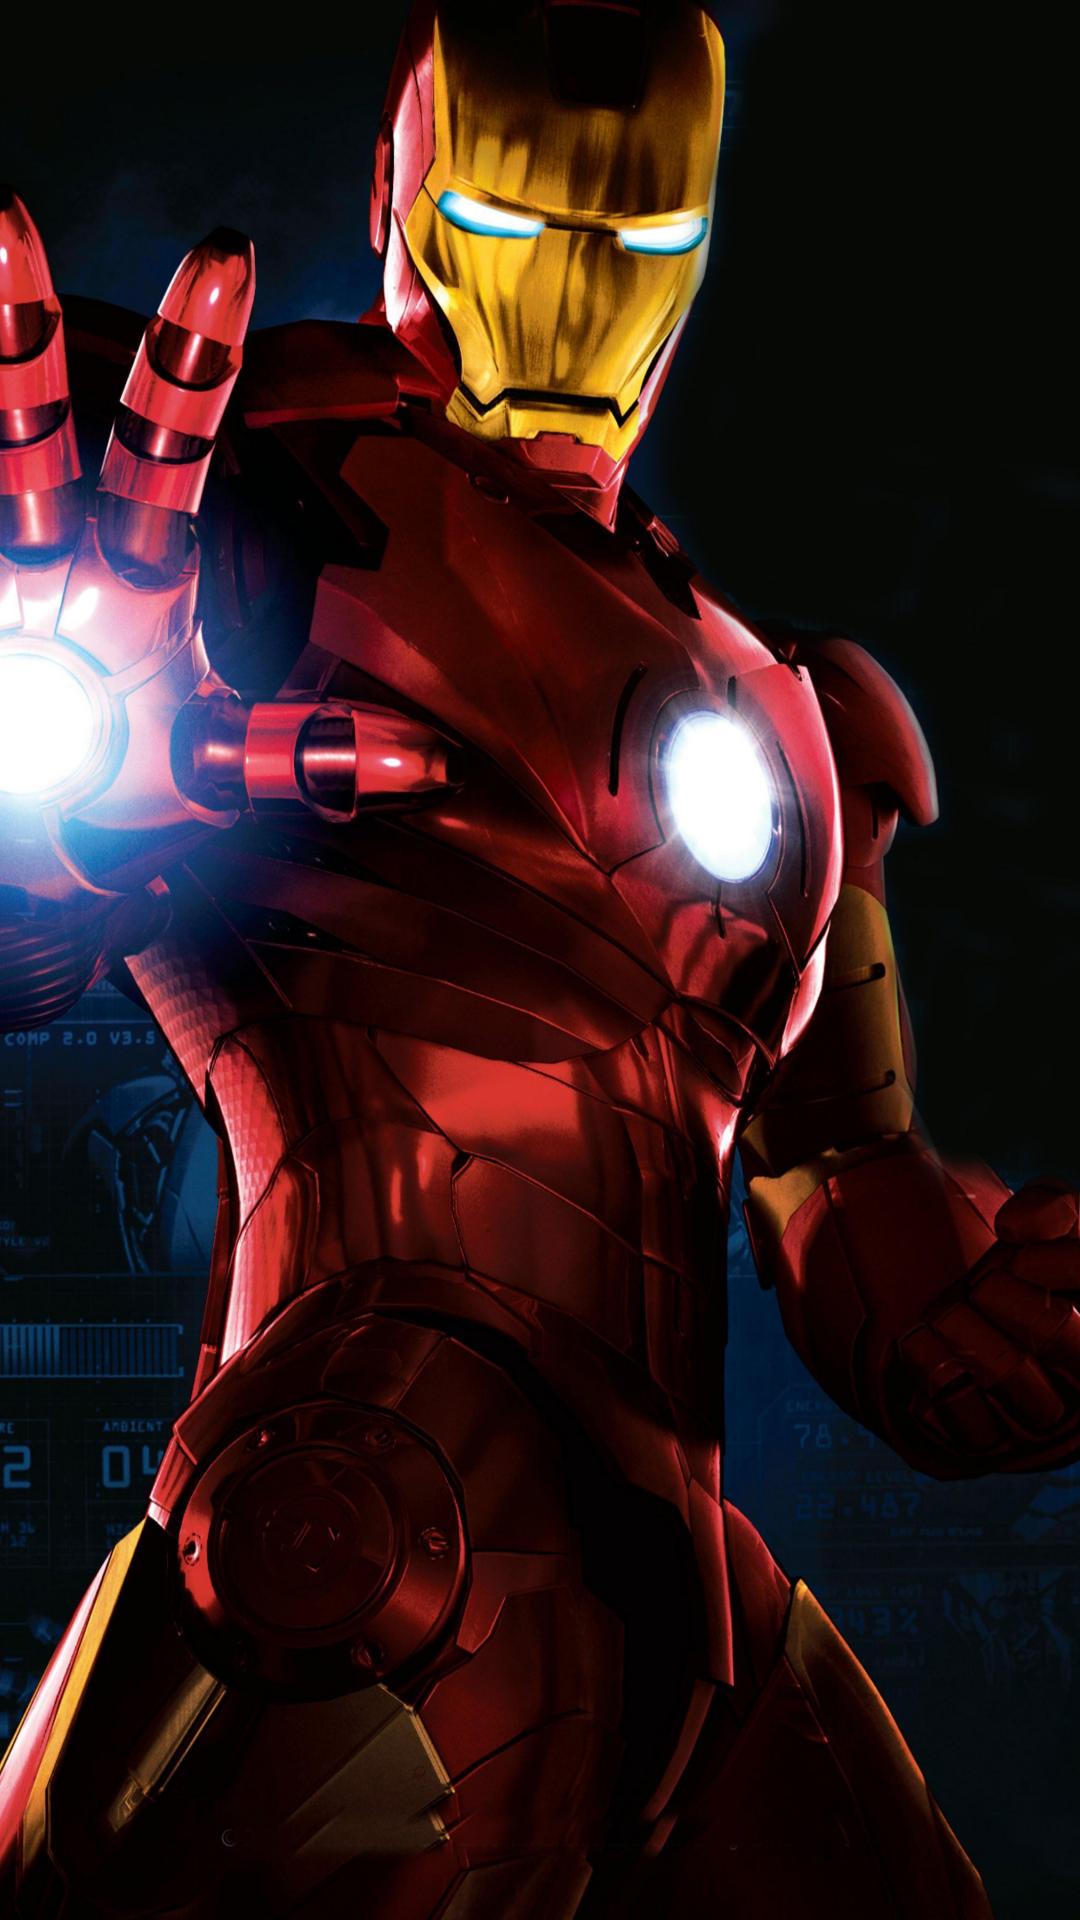 Iron man wallpapers for mobile Group (18+)